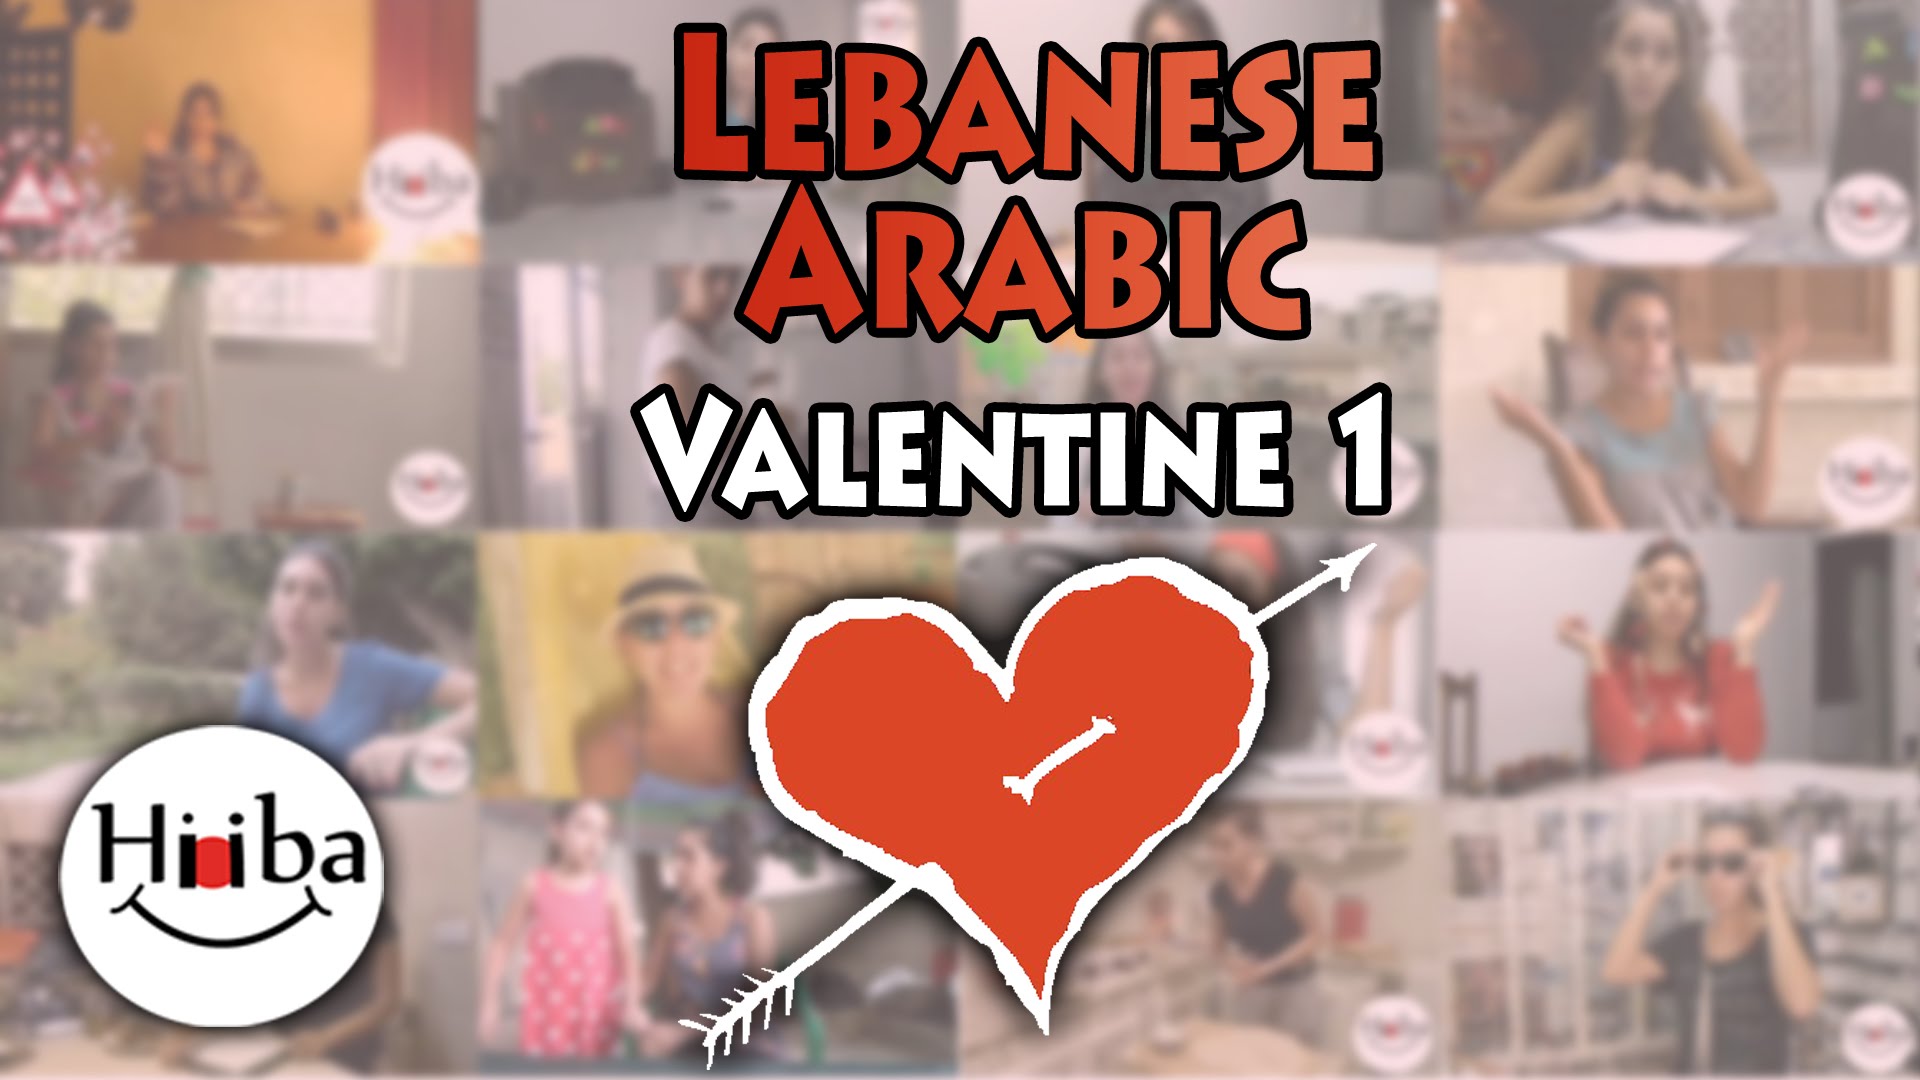 This is the thumbnail of the Lebanese Valentine Lesson number 1. It also contains a red heart with an arrow going through it